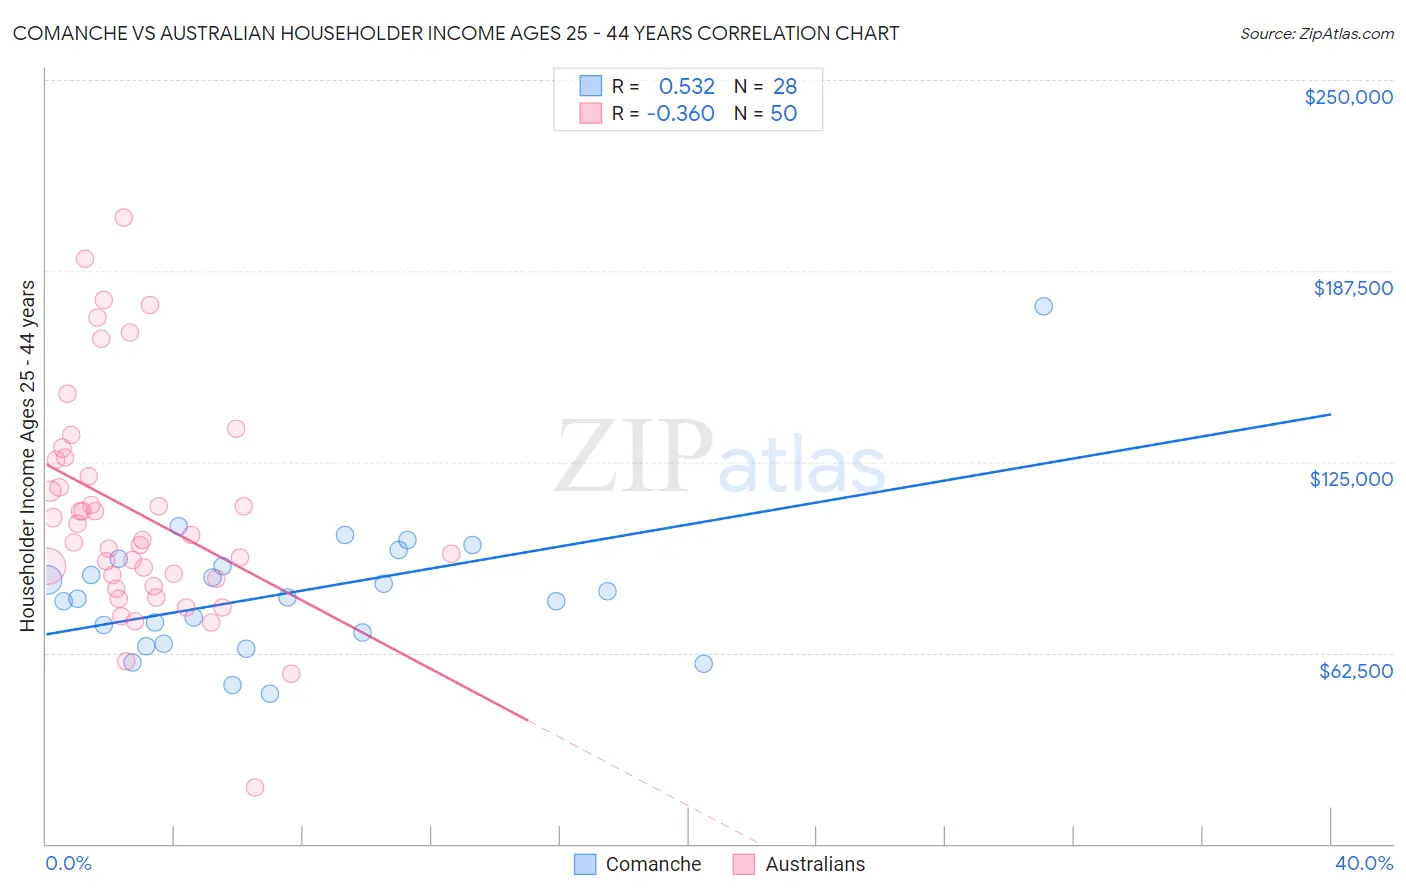 Comanche vs Australian Householder Income Ages 25 - 44 years